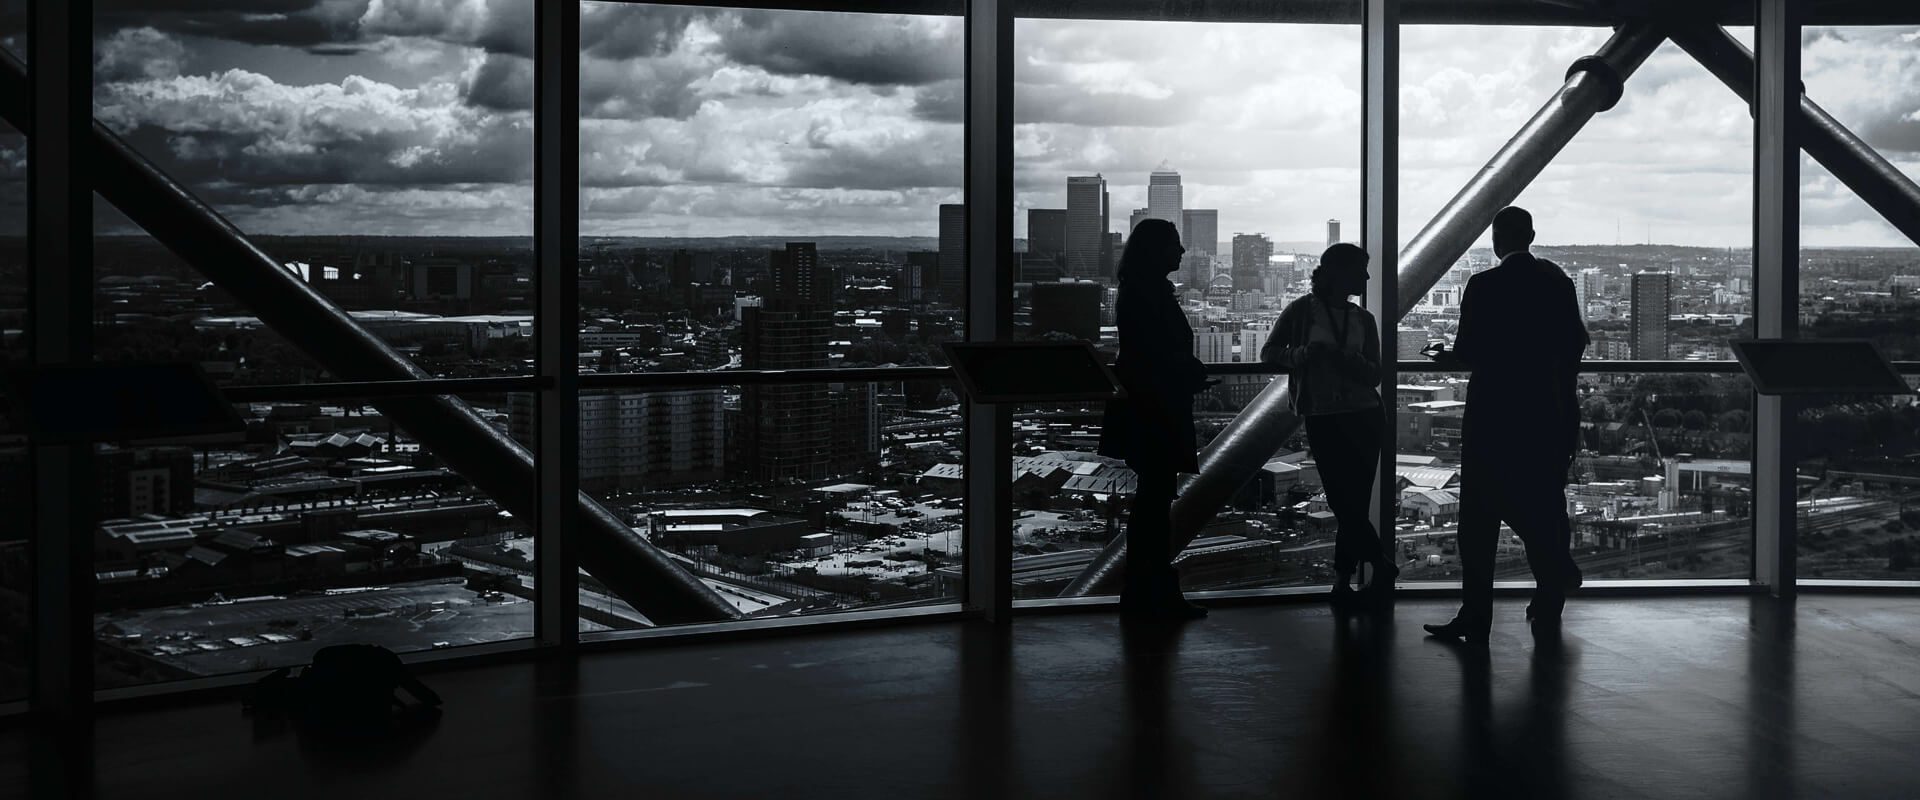 Black and white image of three people talking in front of a glass wall facing a modern city skyline.